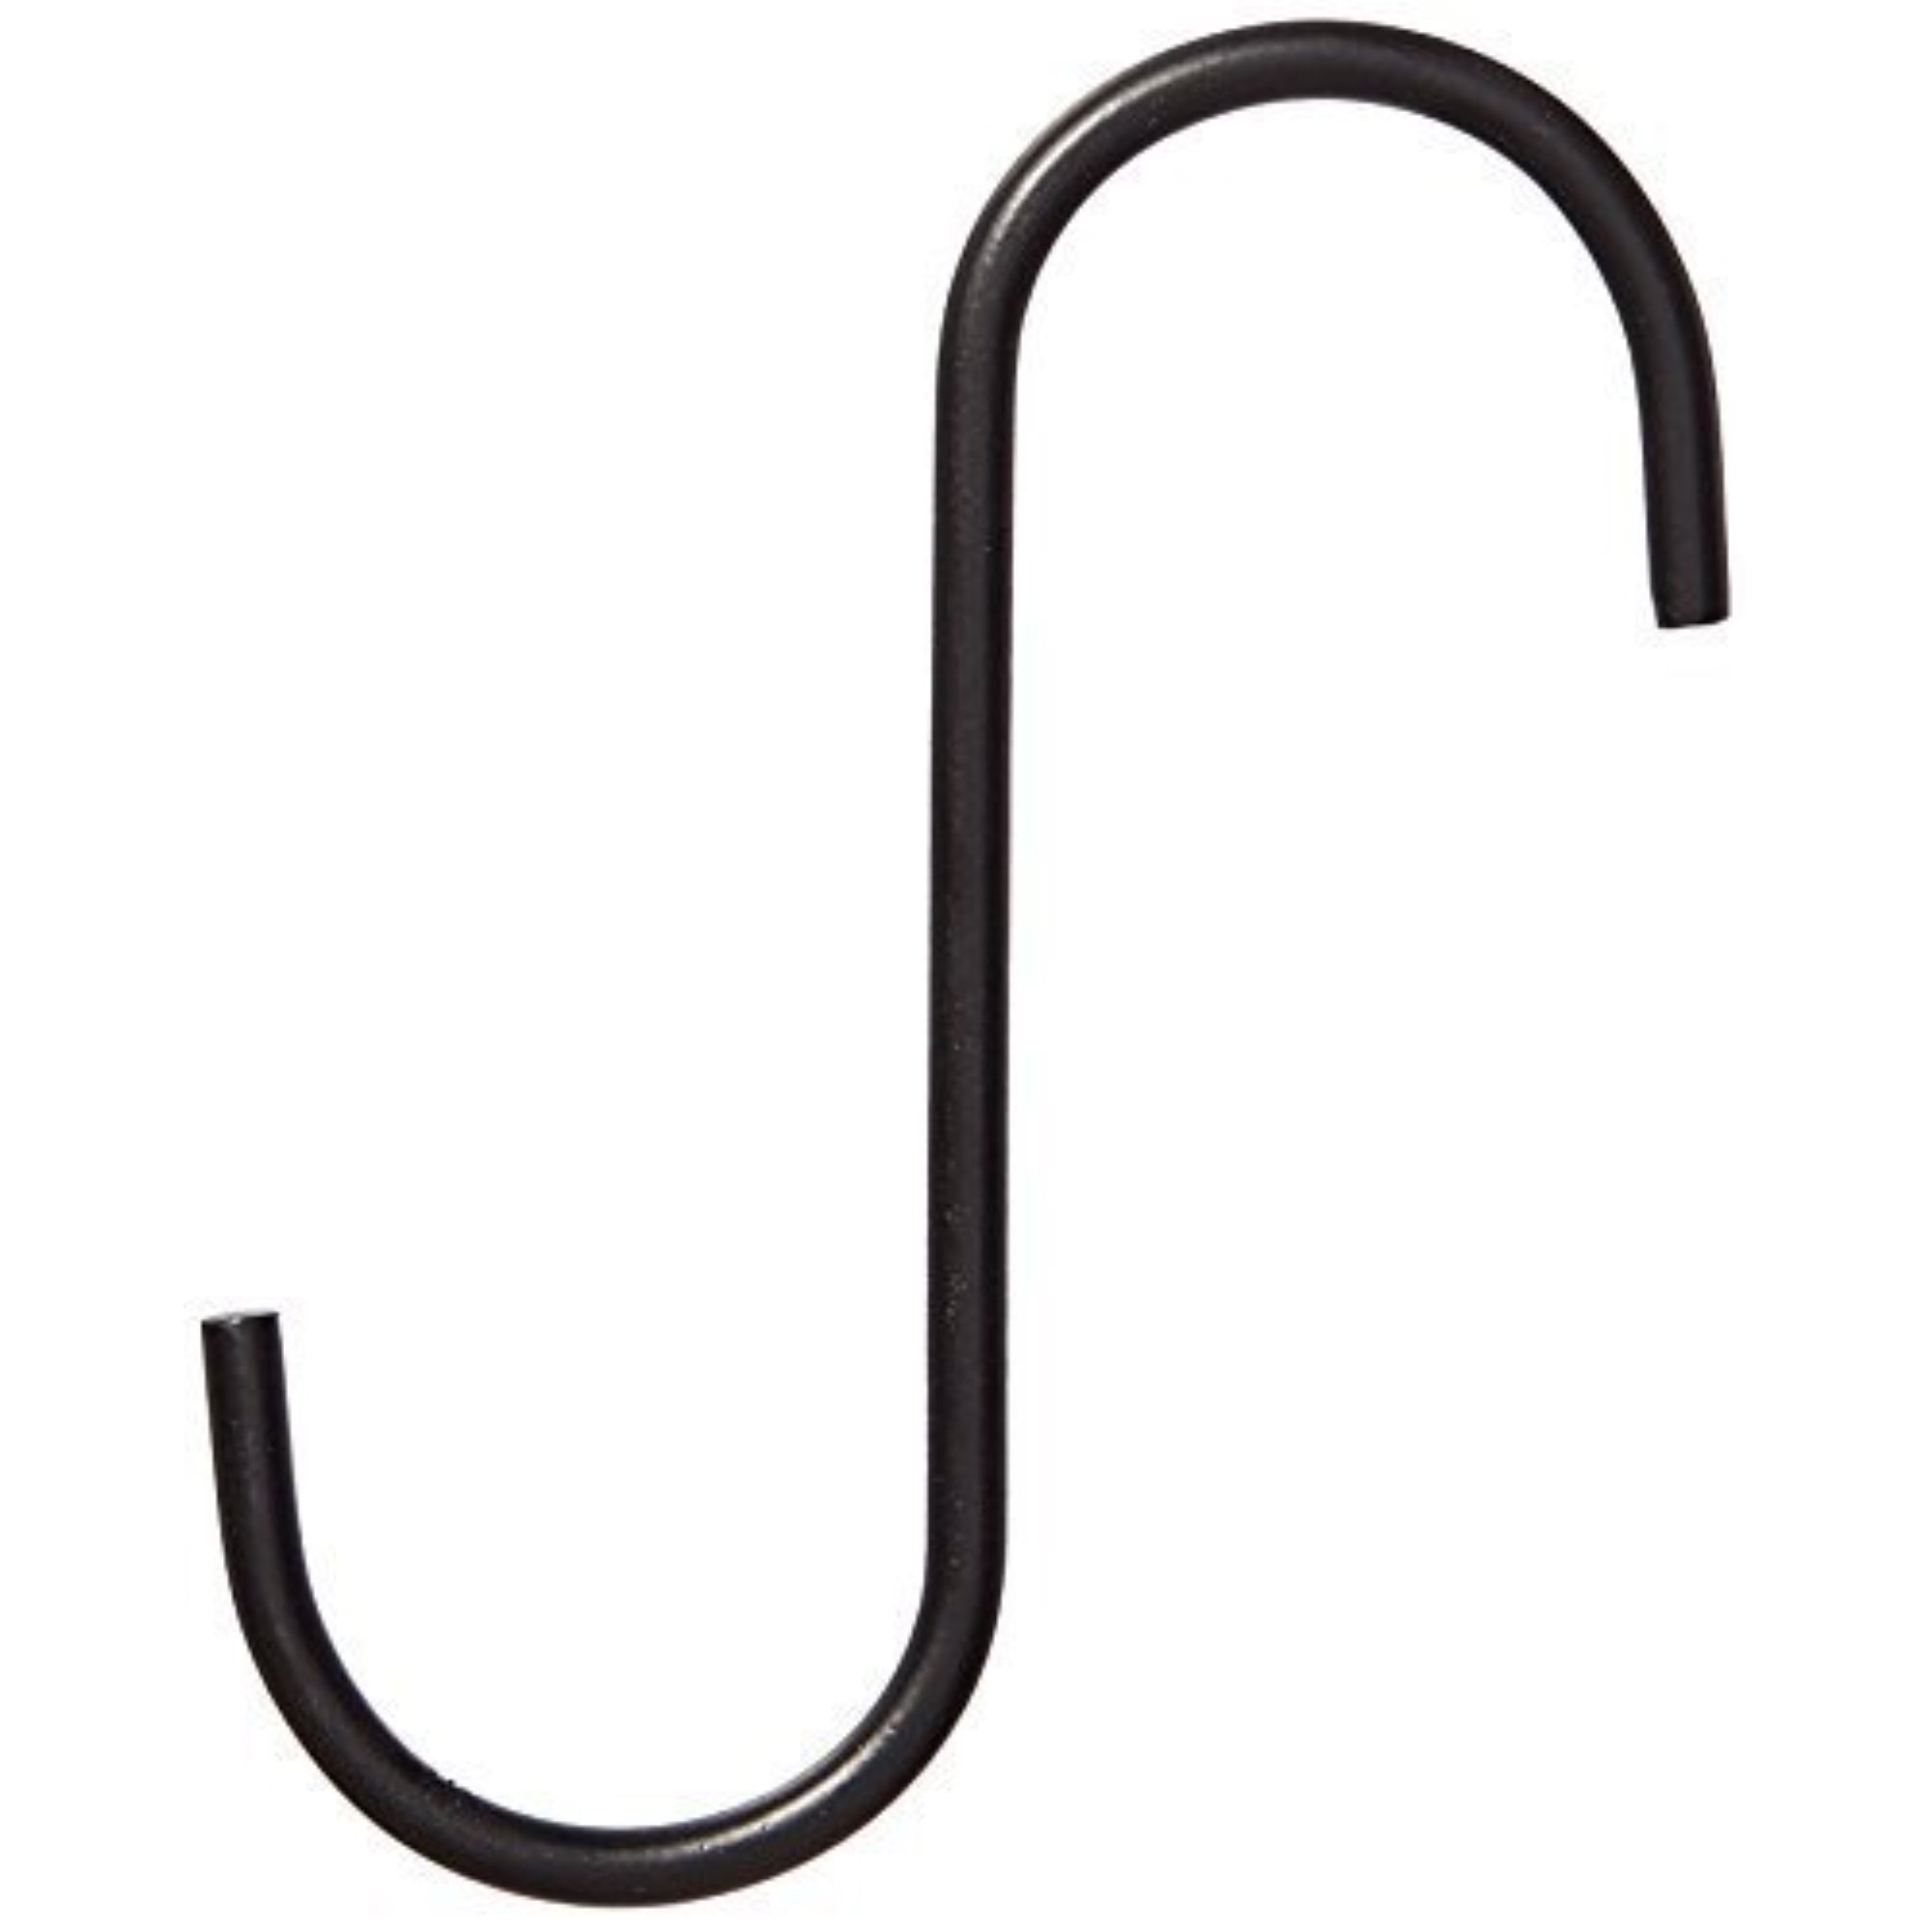 Hookery (#GH06) Metal S Extension Hook, Black 6” with 1” opening (Pack of 1)